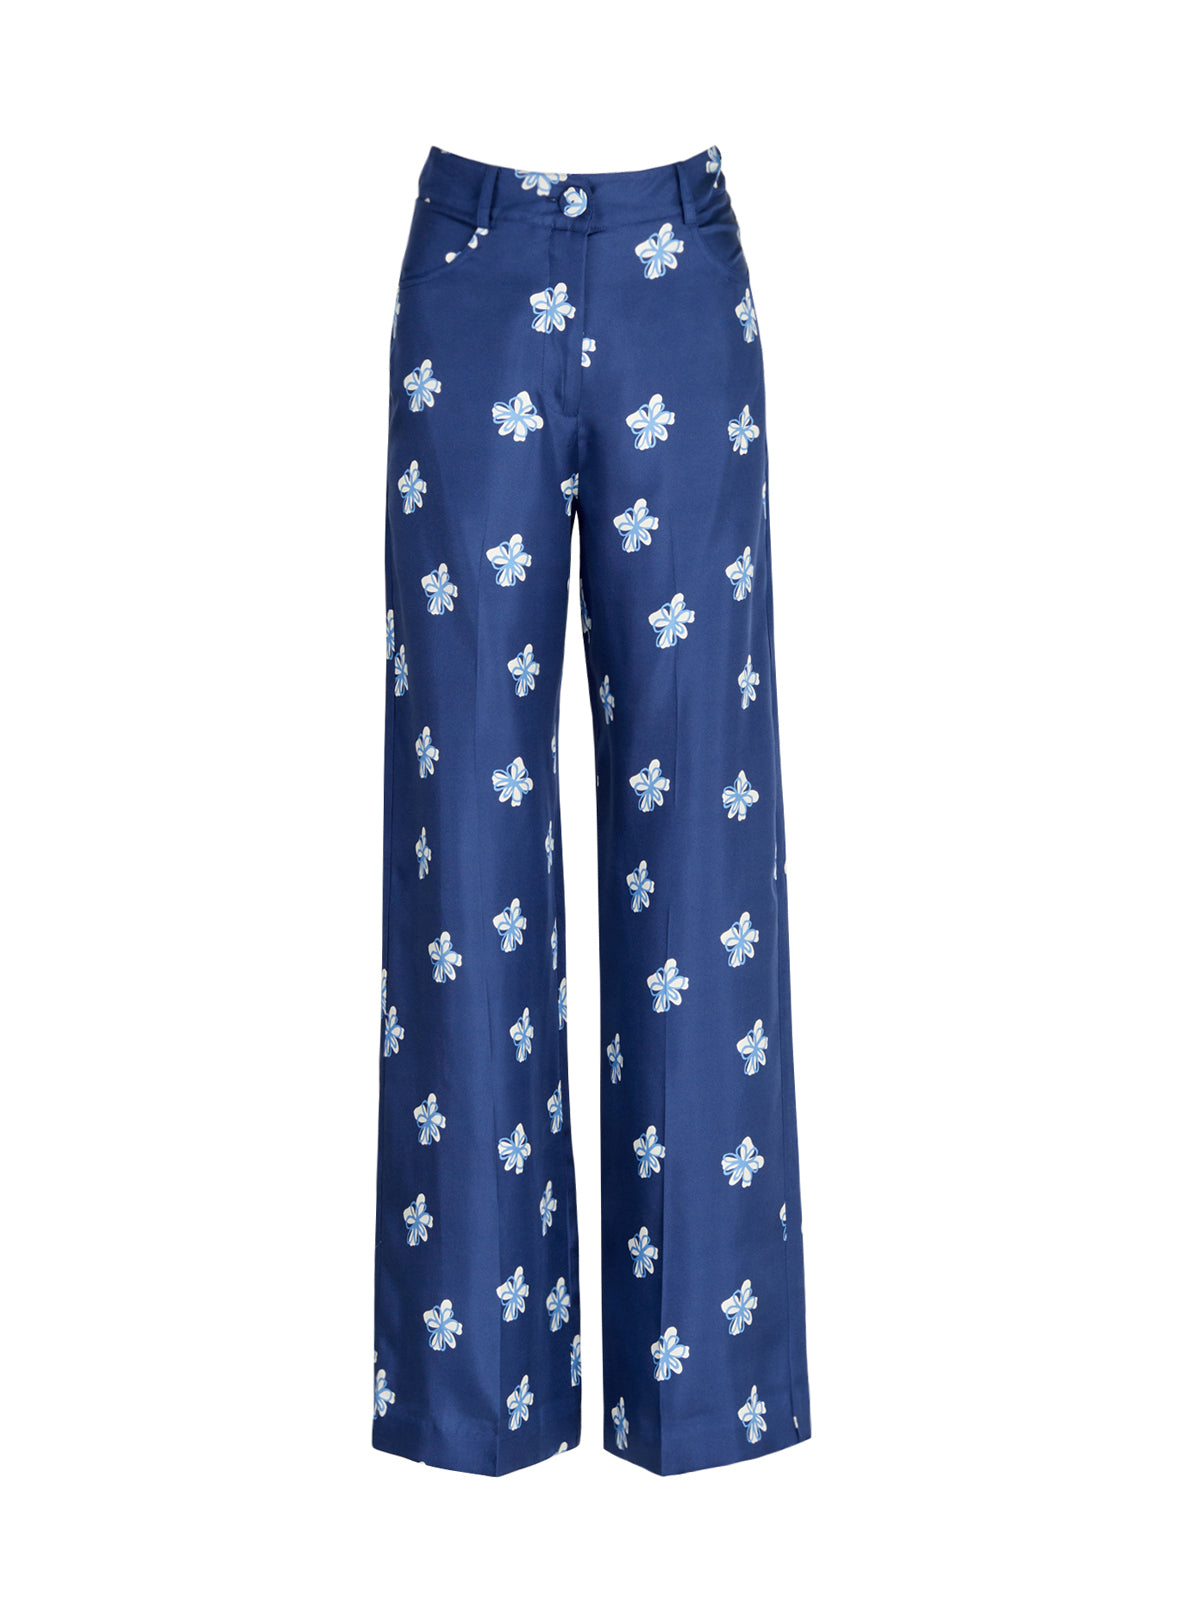 A woman's Emine Pant Navy Bloom with white floral patterns.